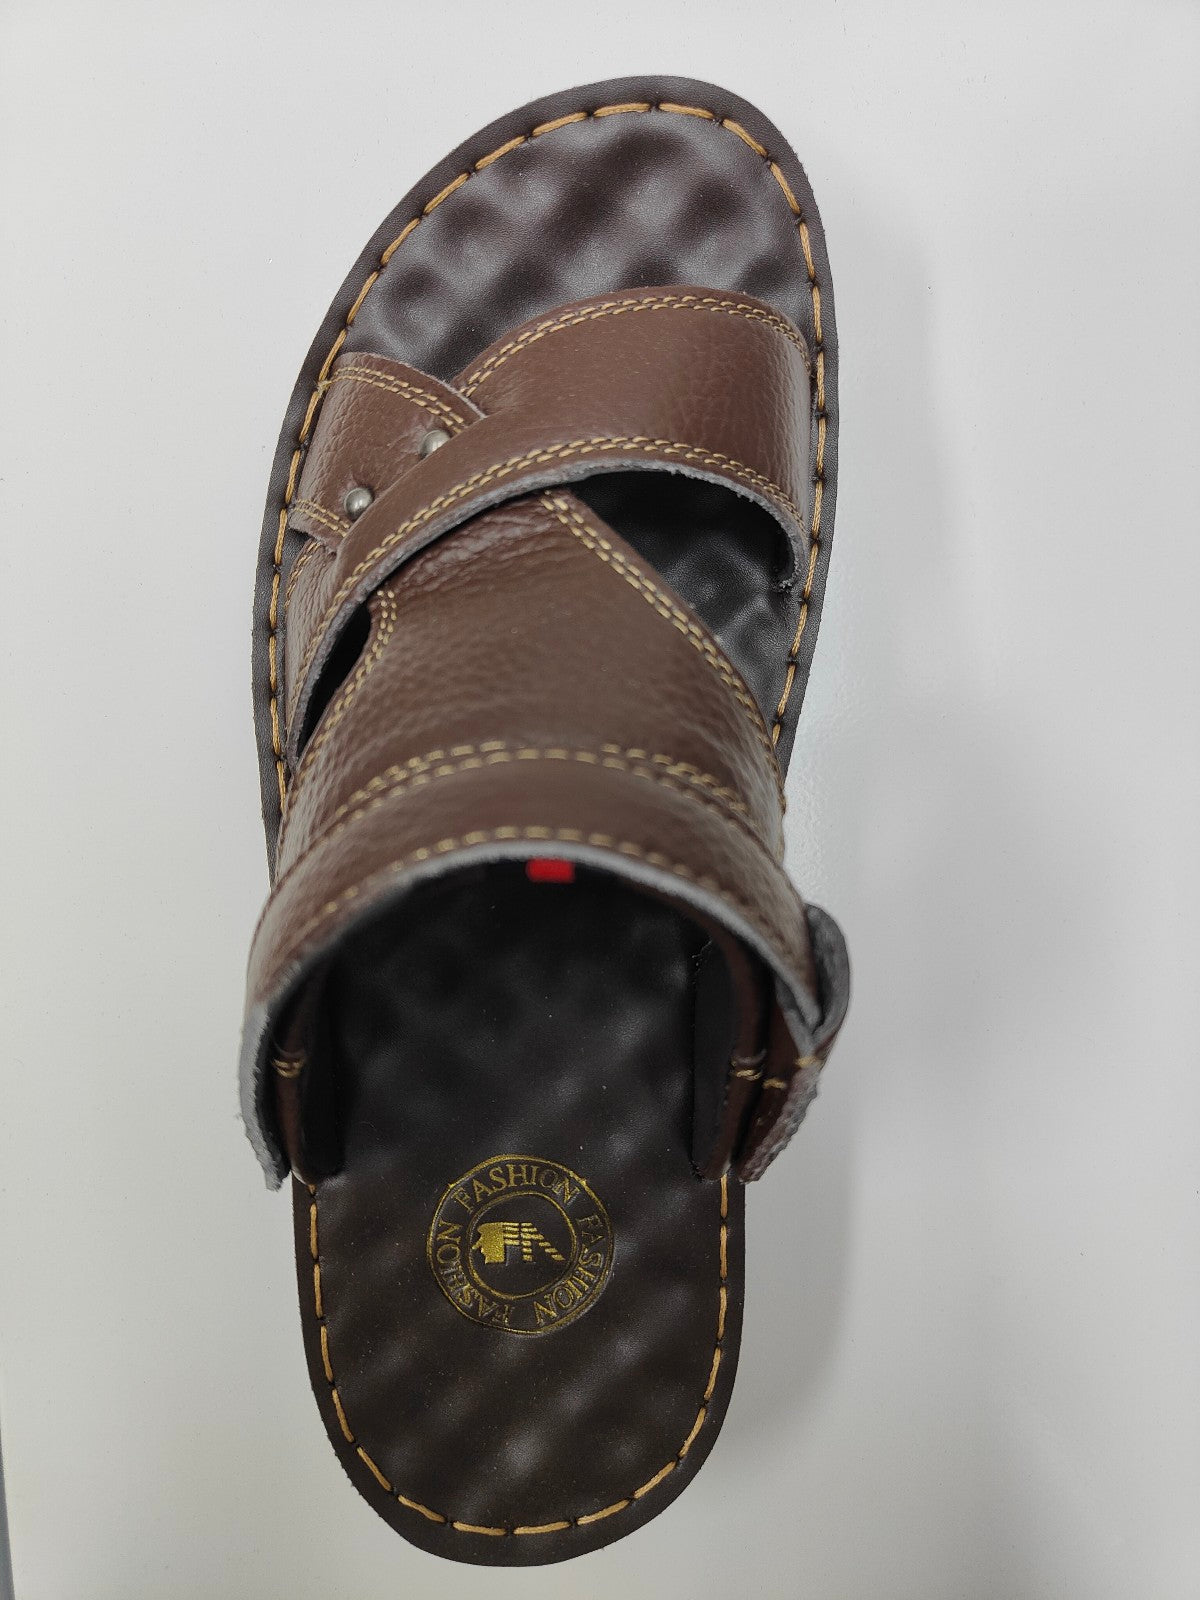 Elevate your style with Dark Brown Design 2 Men's Sandals exclusively from Hikmah Boutique. Crafted with genuine cowhide leather, extra comfort, and an original design. Discover quality and affordability.